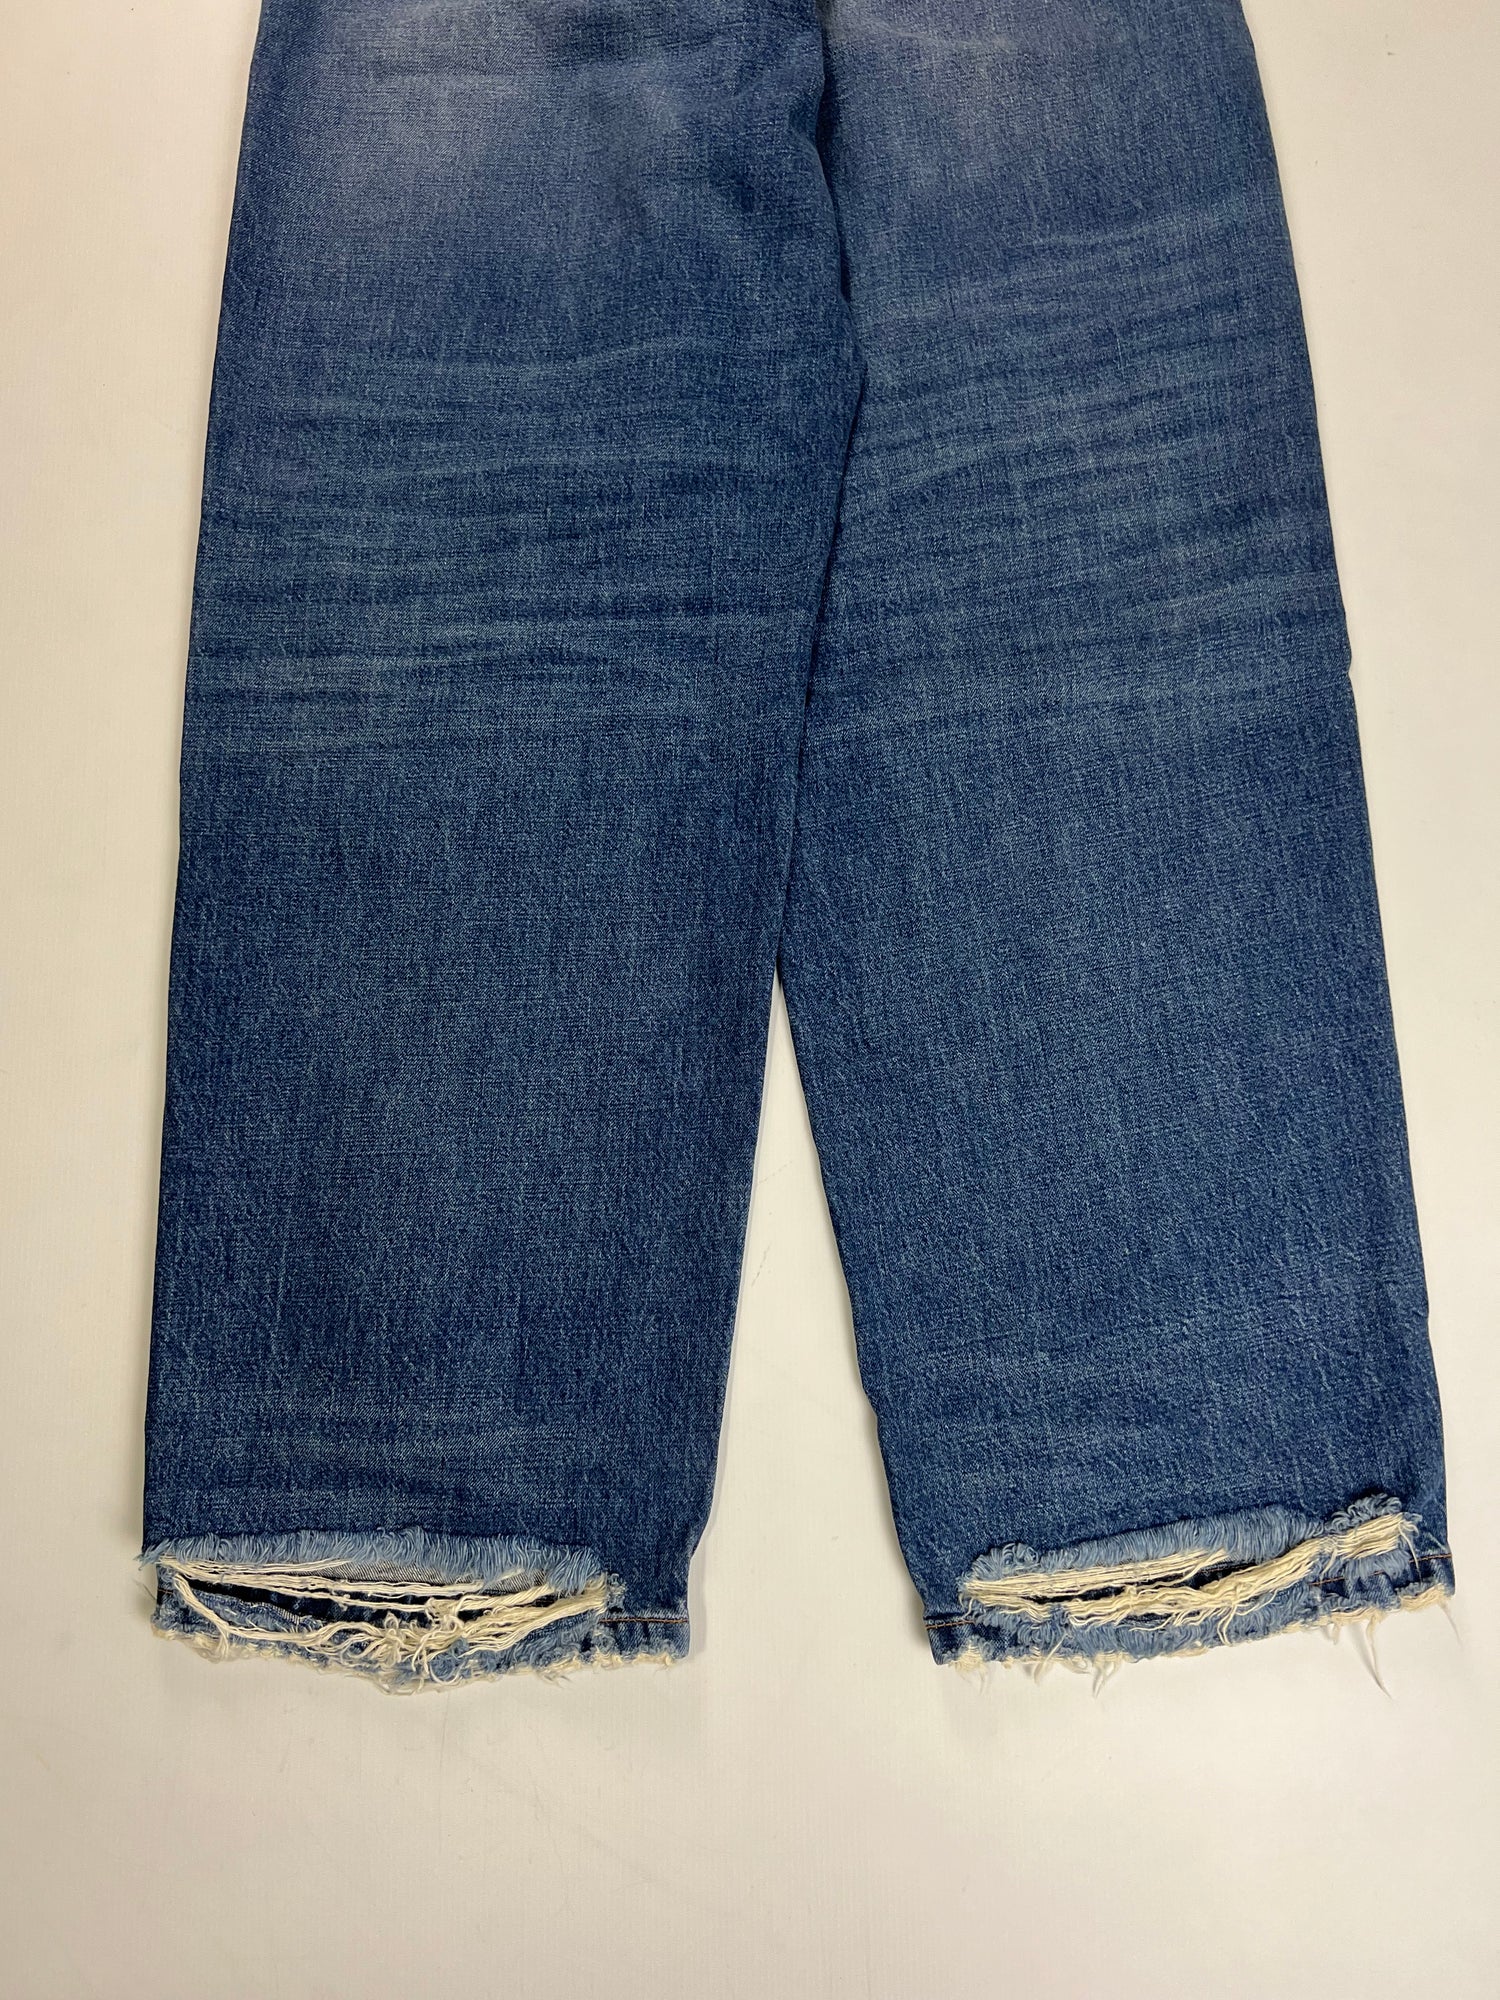 Balenciaga Fall22 lost tape pull up Jeans SZ:S – Bankofgrails